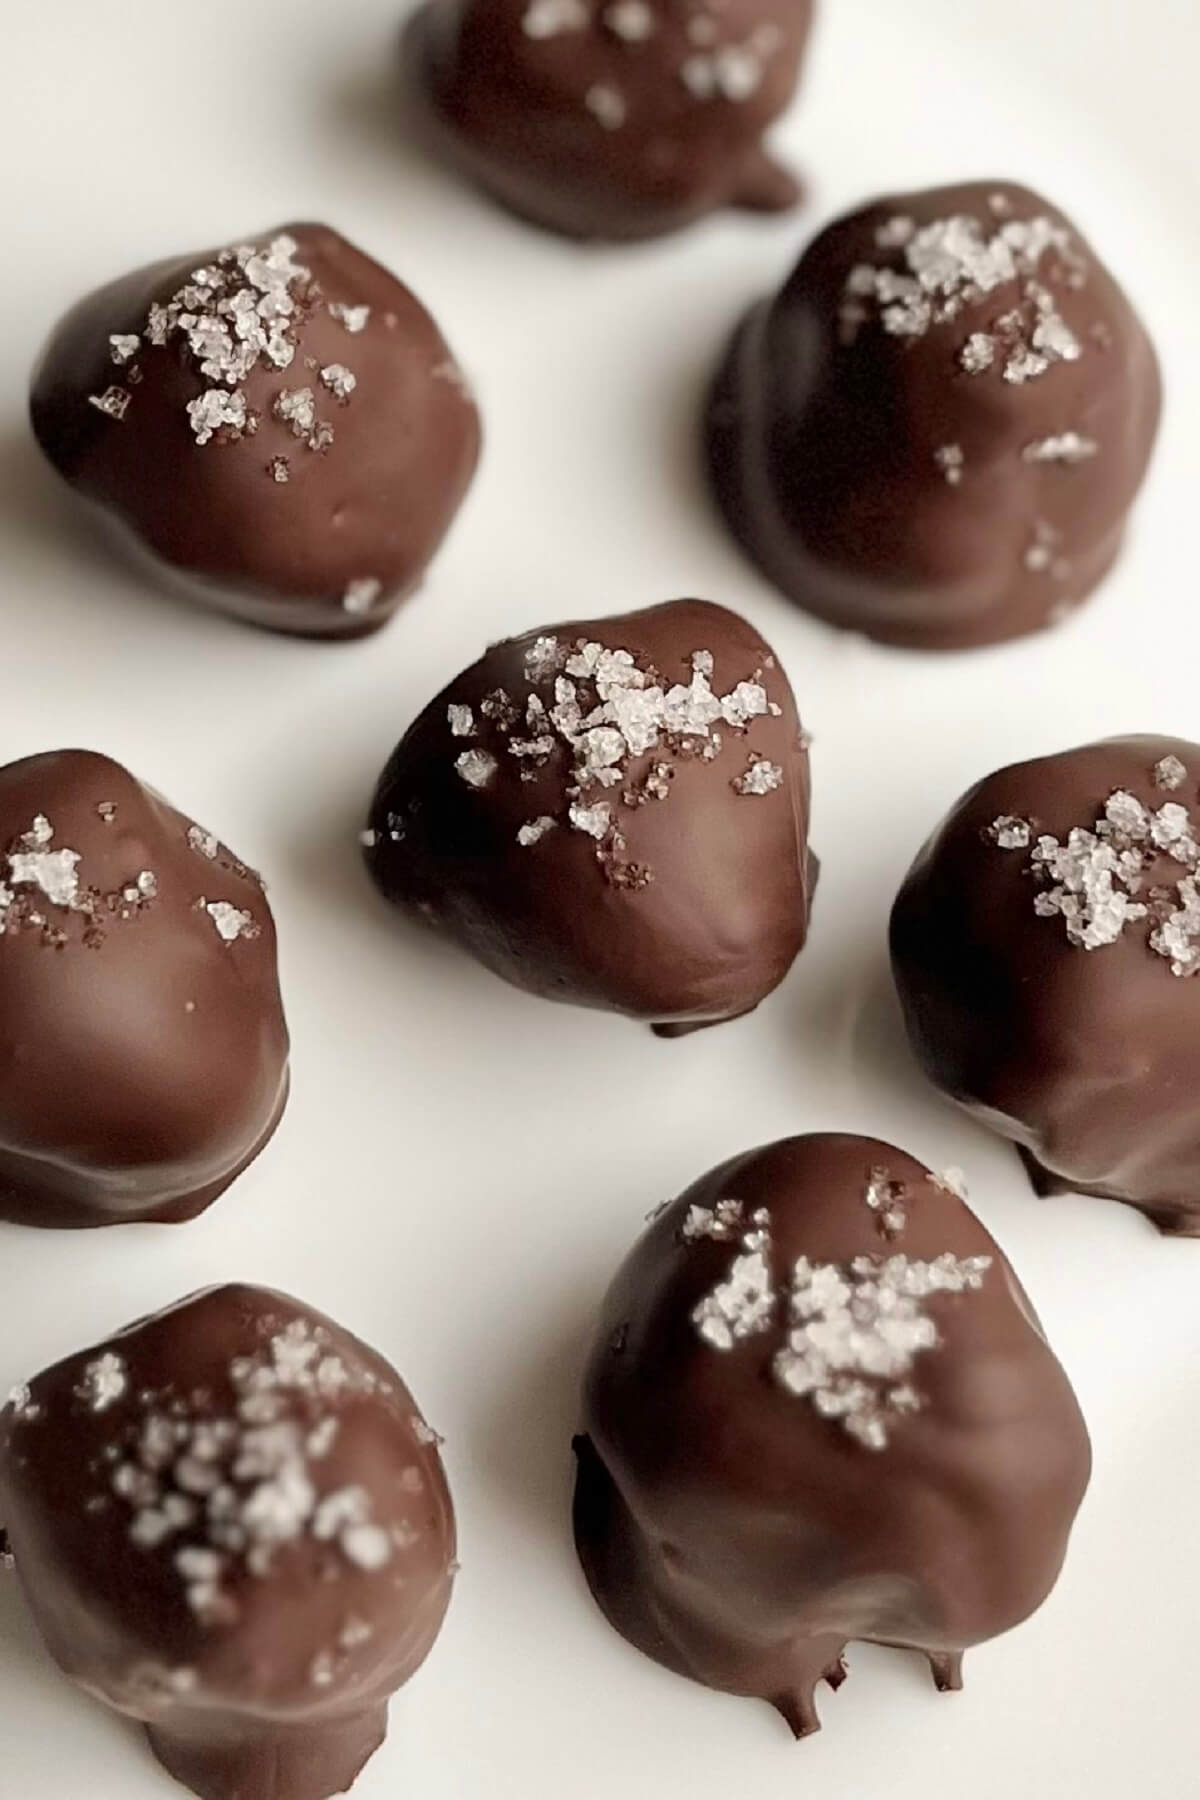 Chocolate olive oil truffles on a white plate.